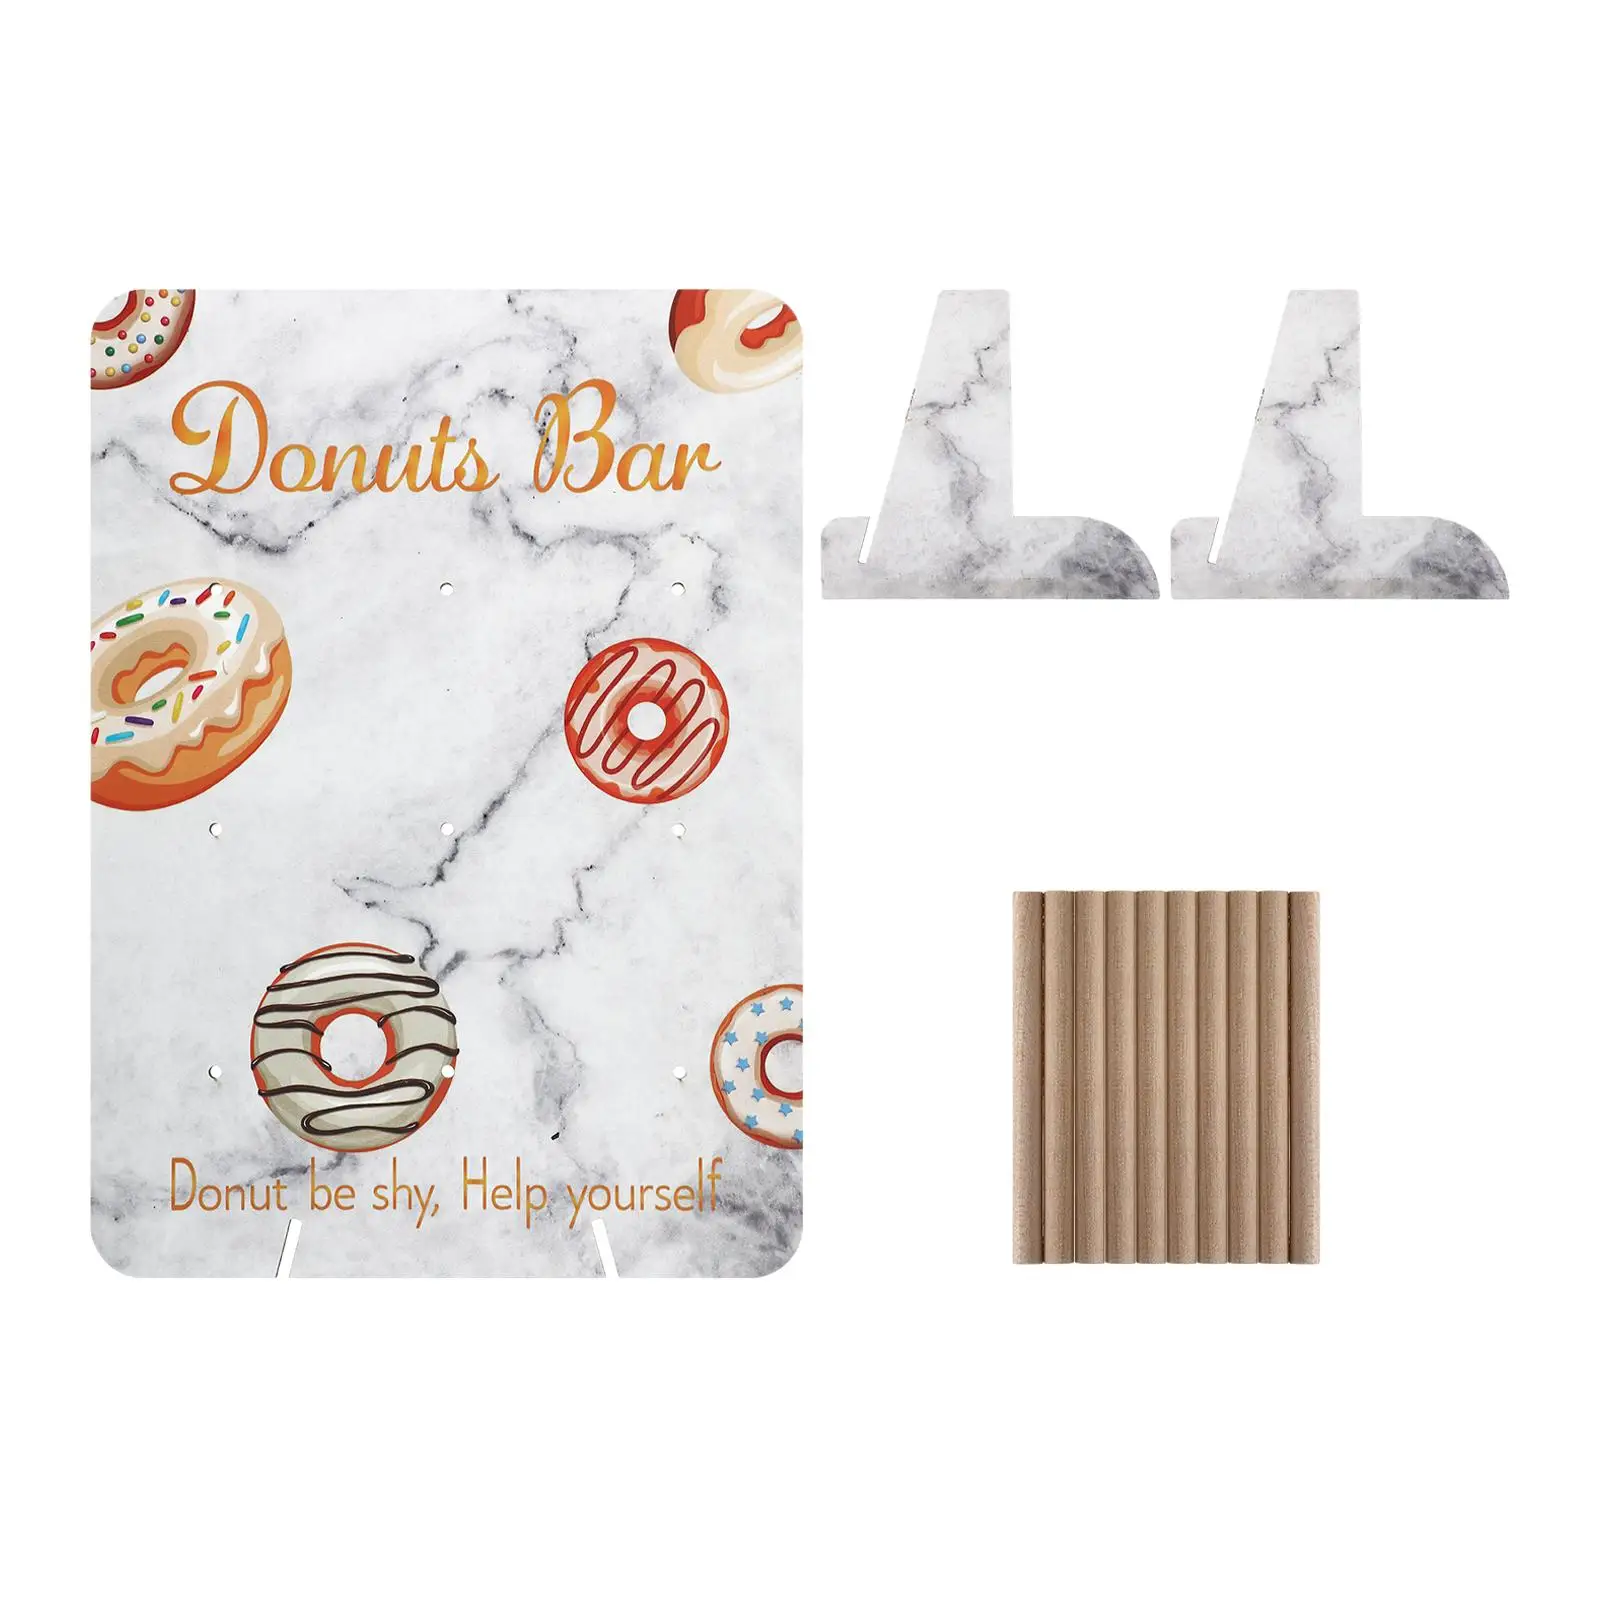 Reusable Donut Wall Stand Rustic Doughnut Board Holder for Baby Showers Donut Party Supplies Bridal Shower Birthday Decorations